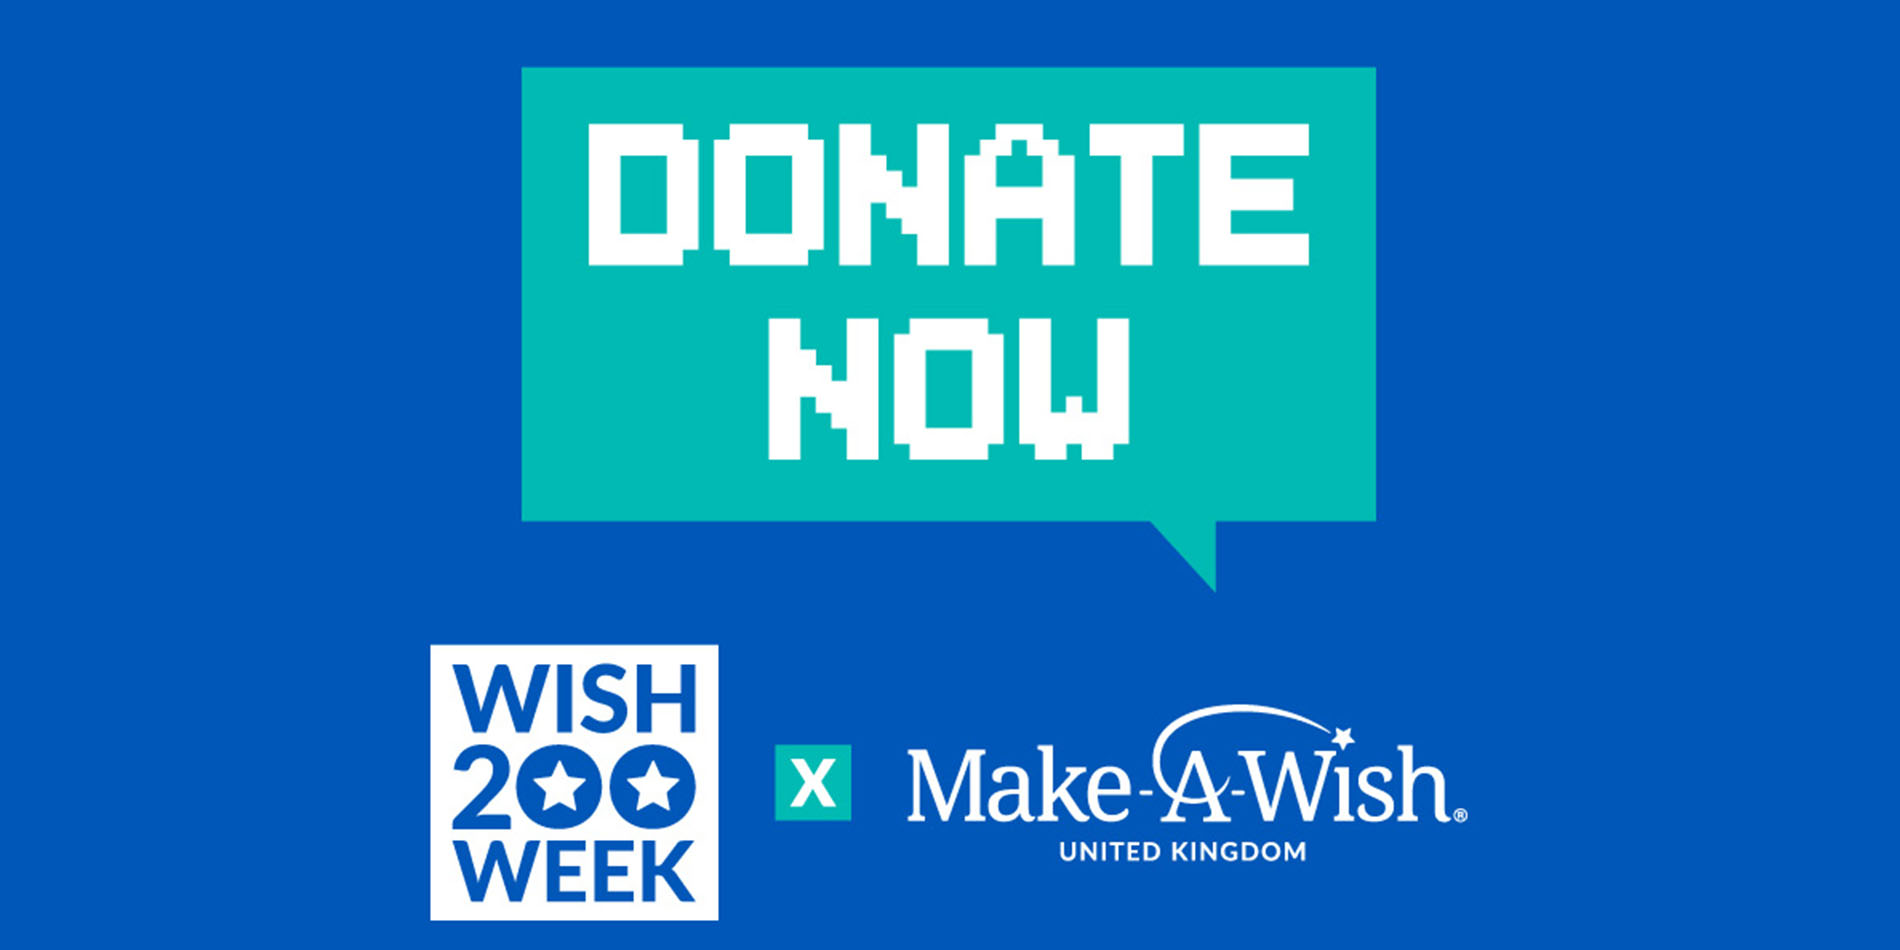 Football Manager creators contribute to Make A Wish UK’s Wish 200 Week